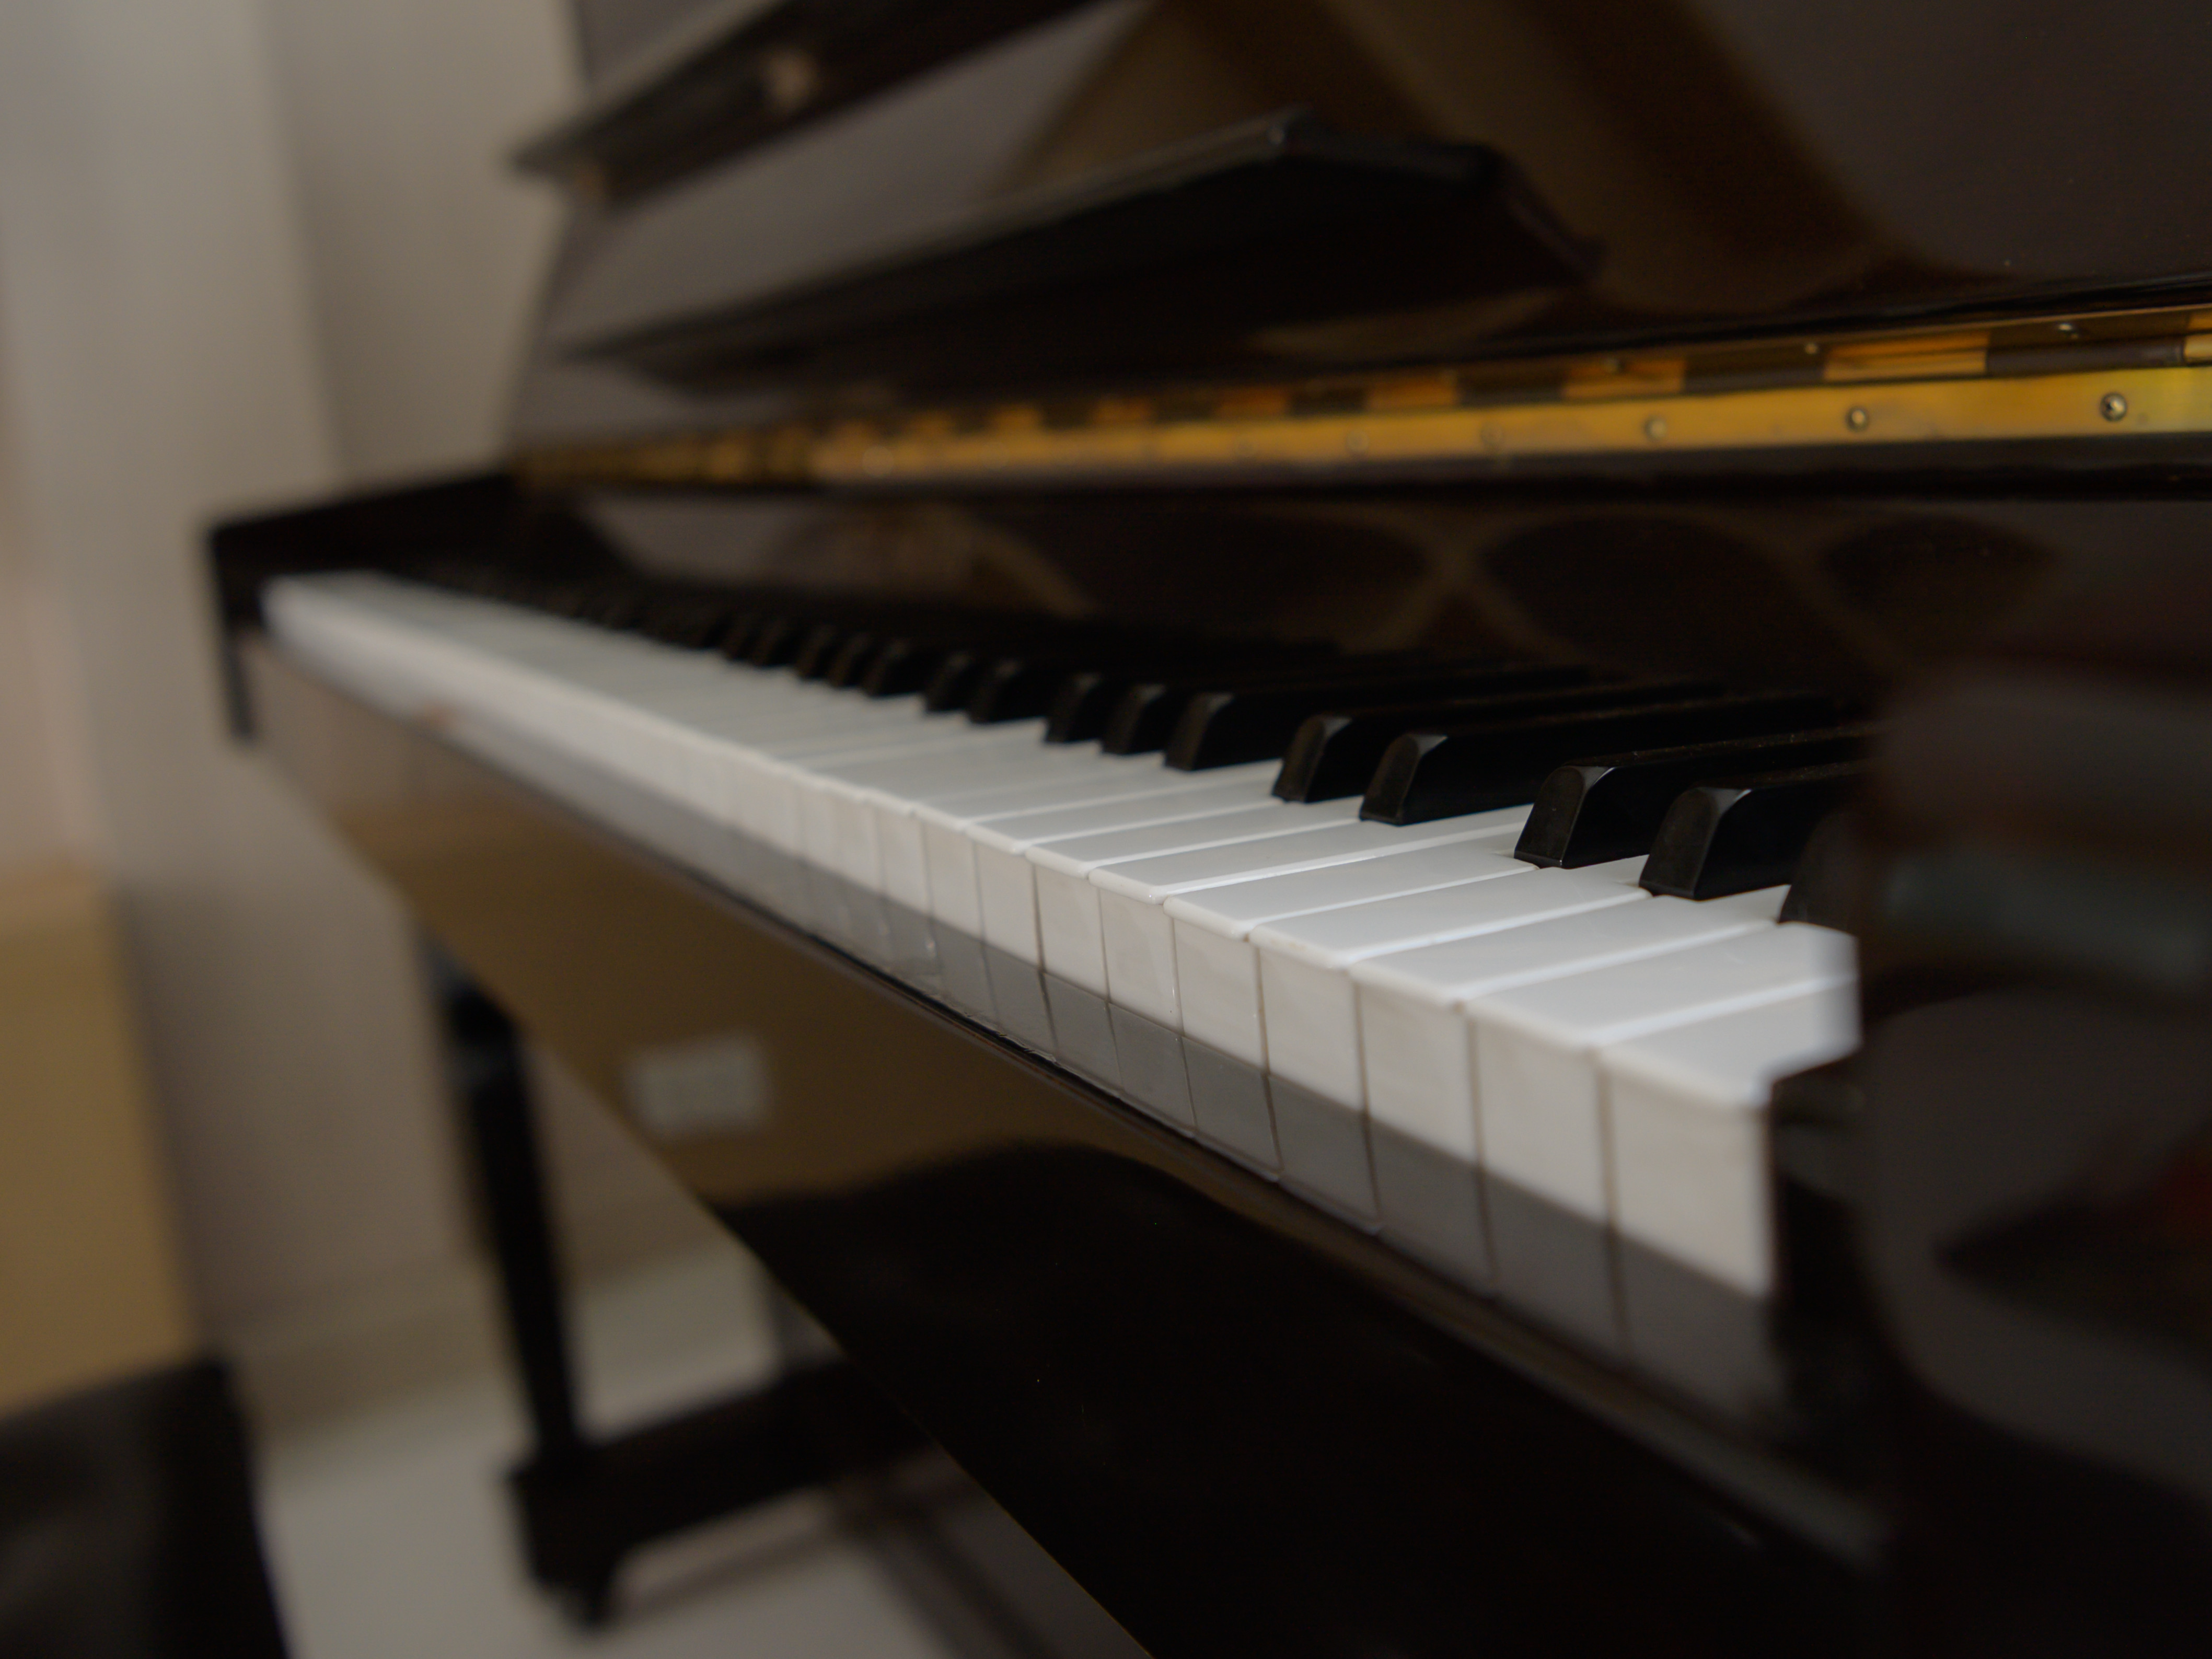 Stock Photo of a Piano